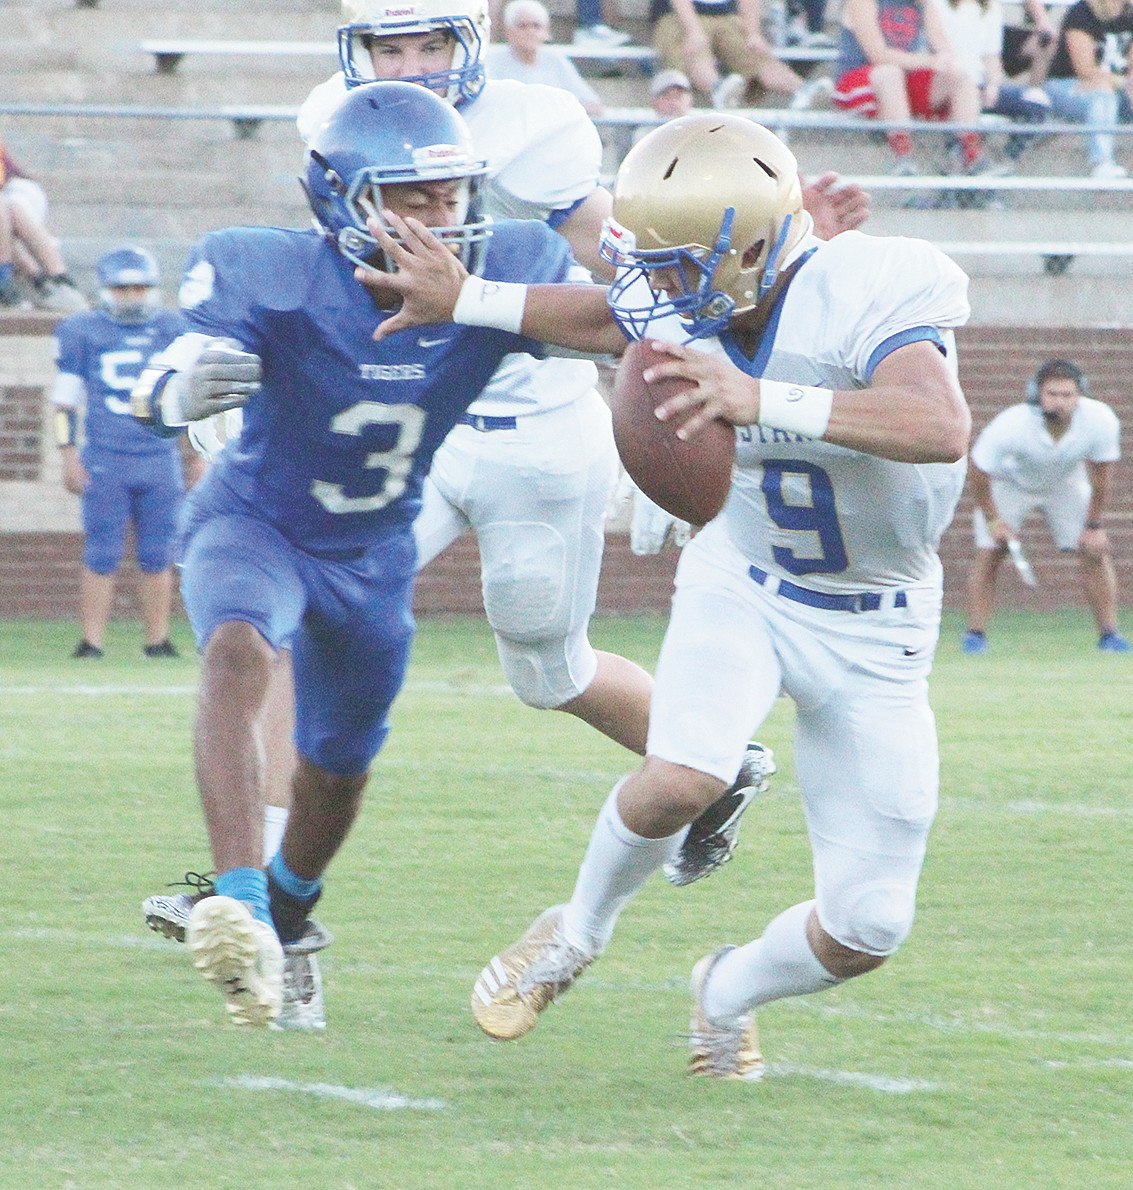 Hunter Ensley stiff arms Bruceton’s Cameron Hudson on a keeper.